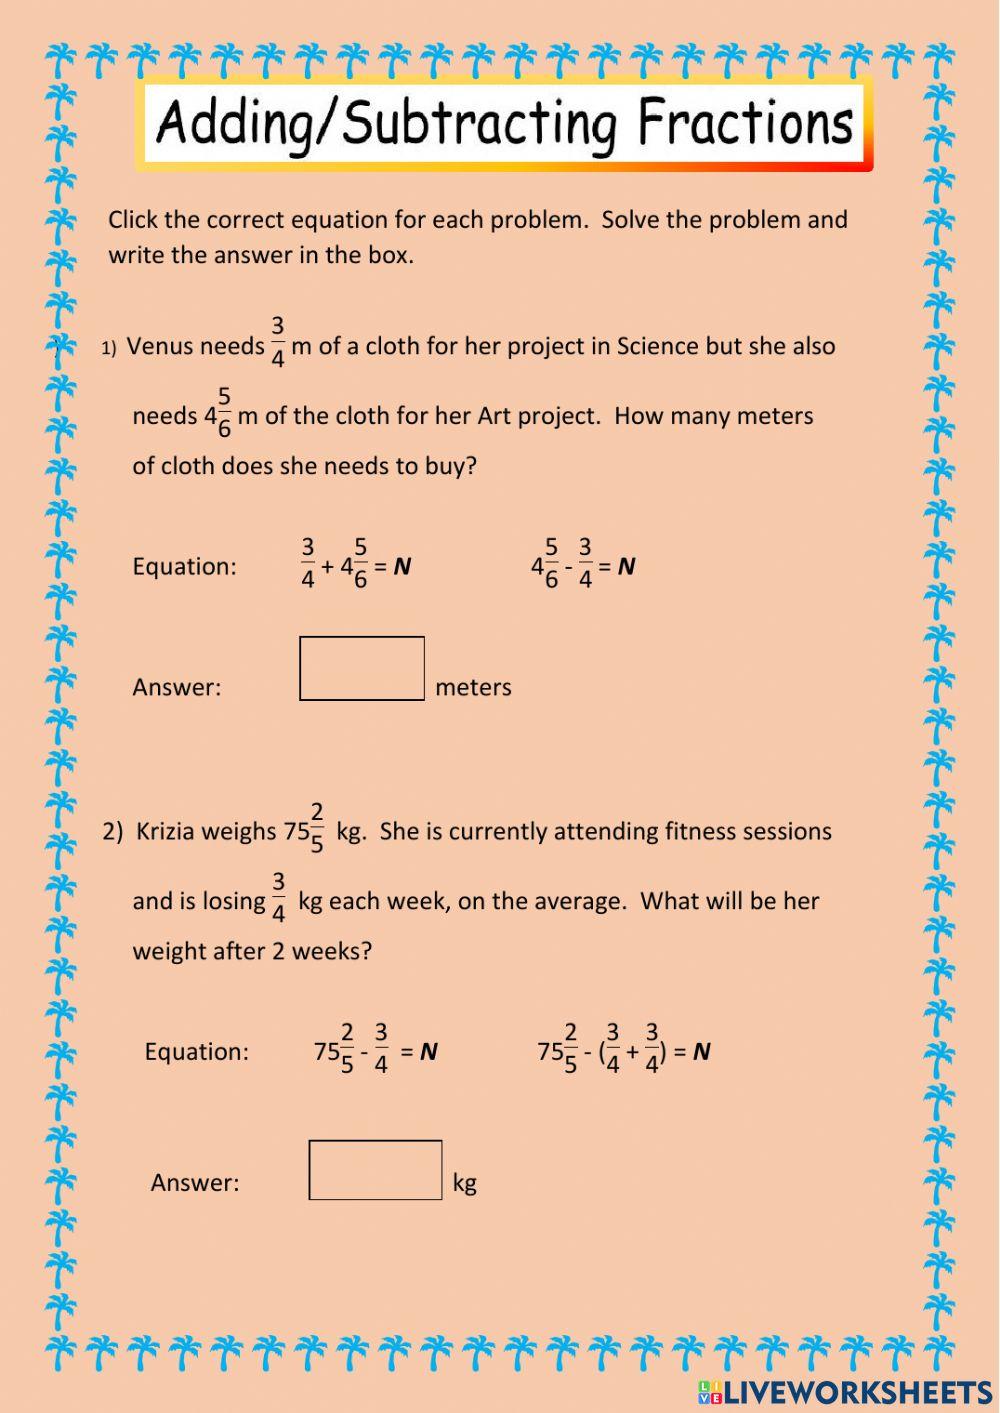 Problem solving (addition - subtraction of fractions)